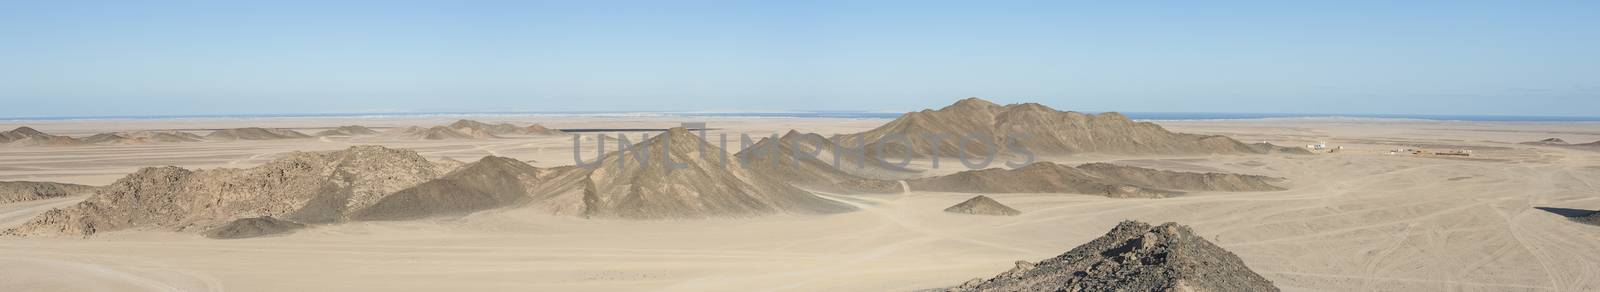 Panoramic view of a rocky desert landscape in africa with mountains